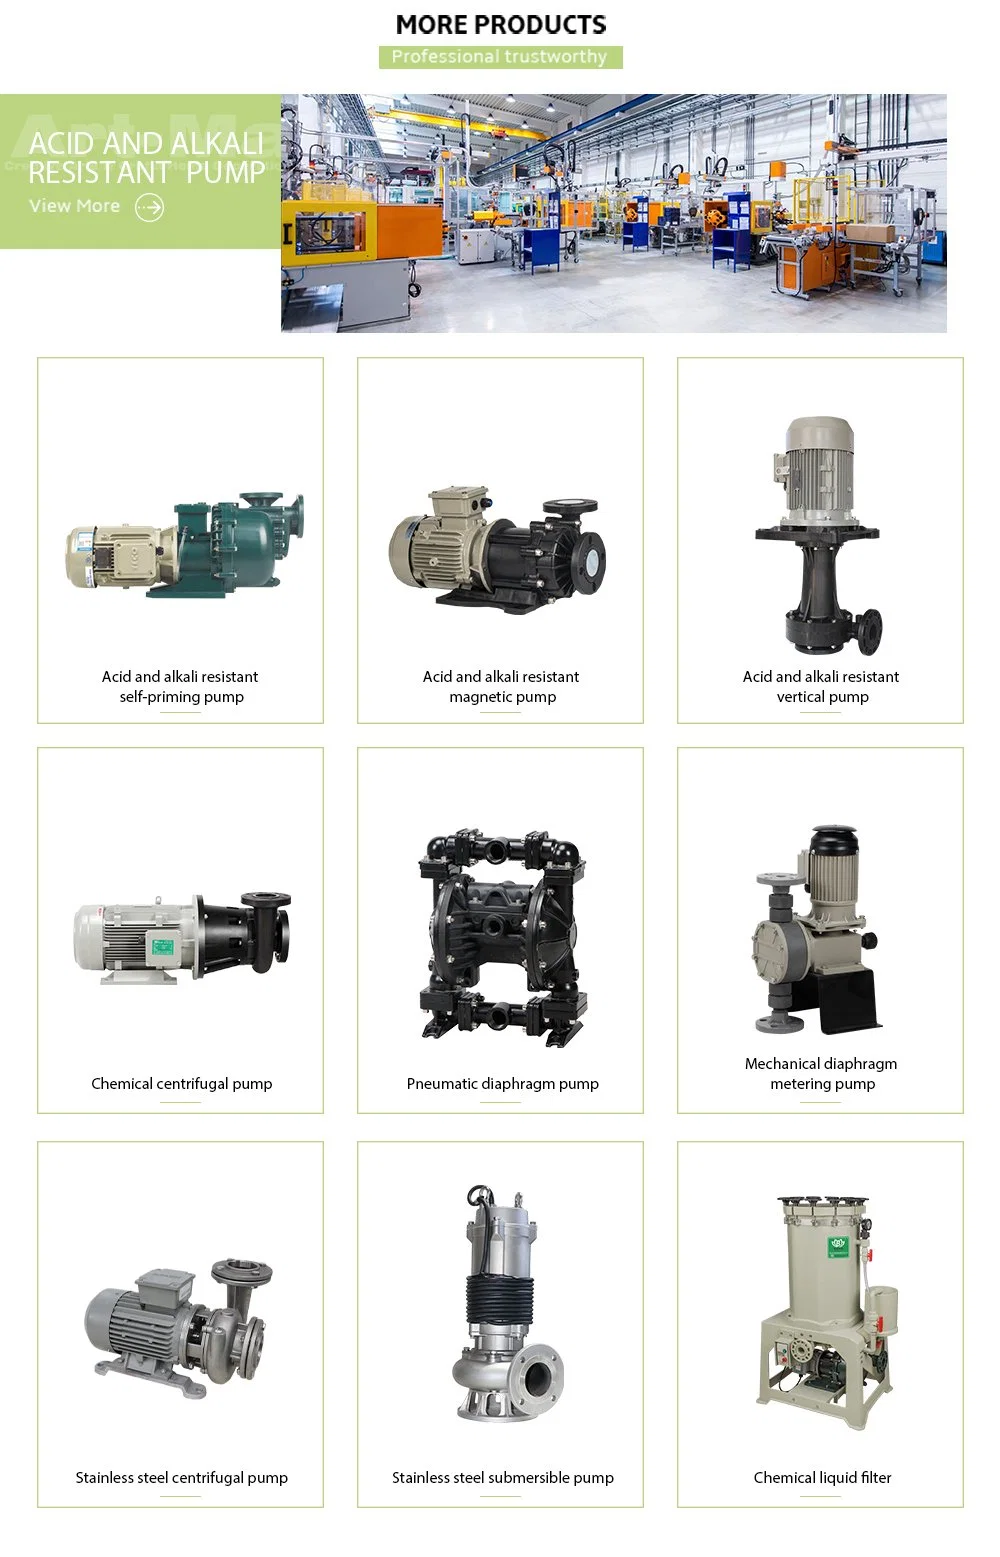 Horizontal End Suction Stainless Steel Centrifugal Chemical Pumps for Anti-Corrosion Acid Alkali